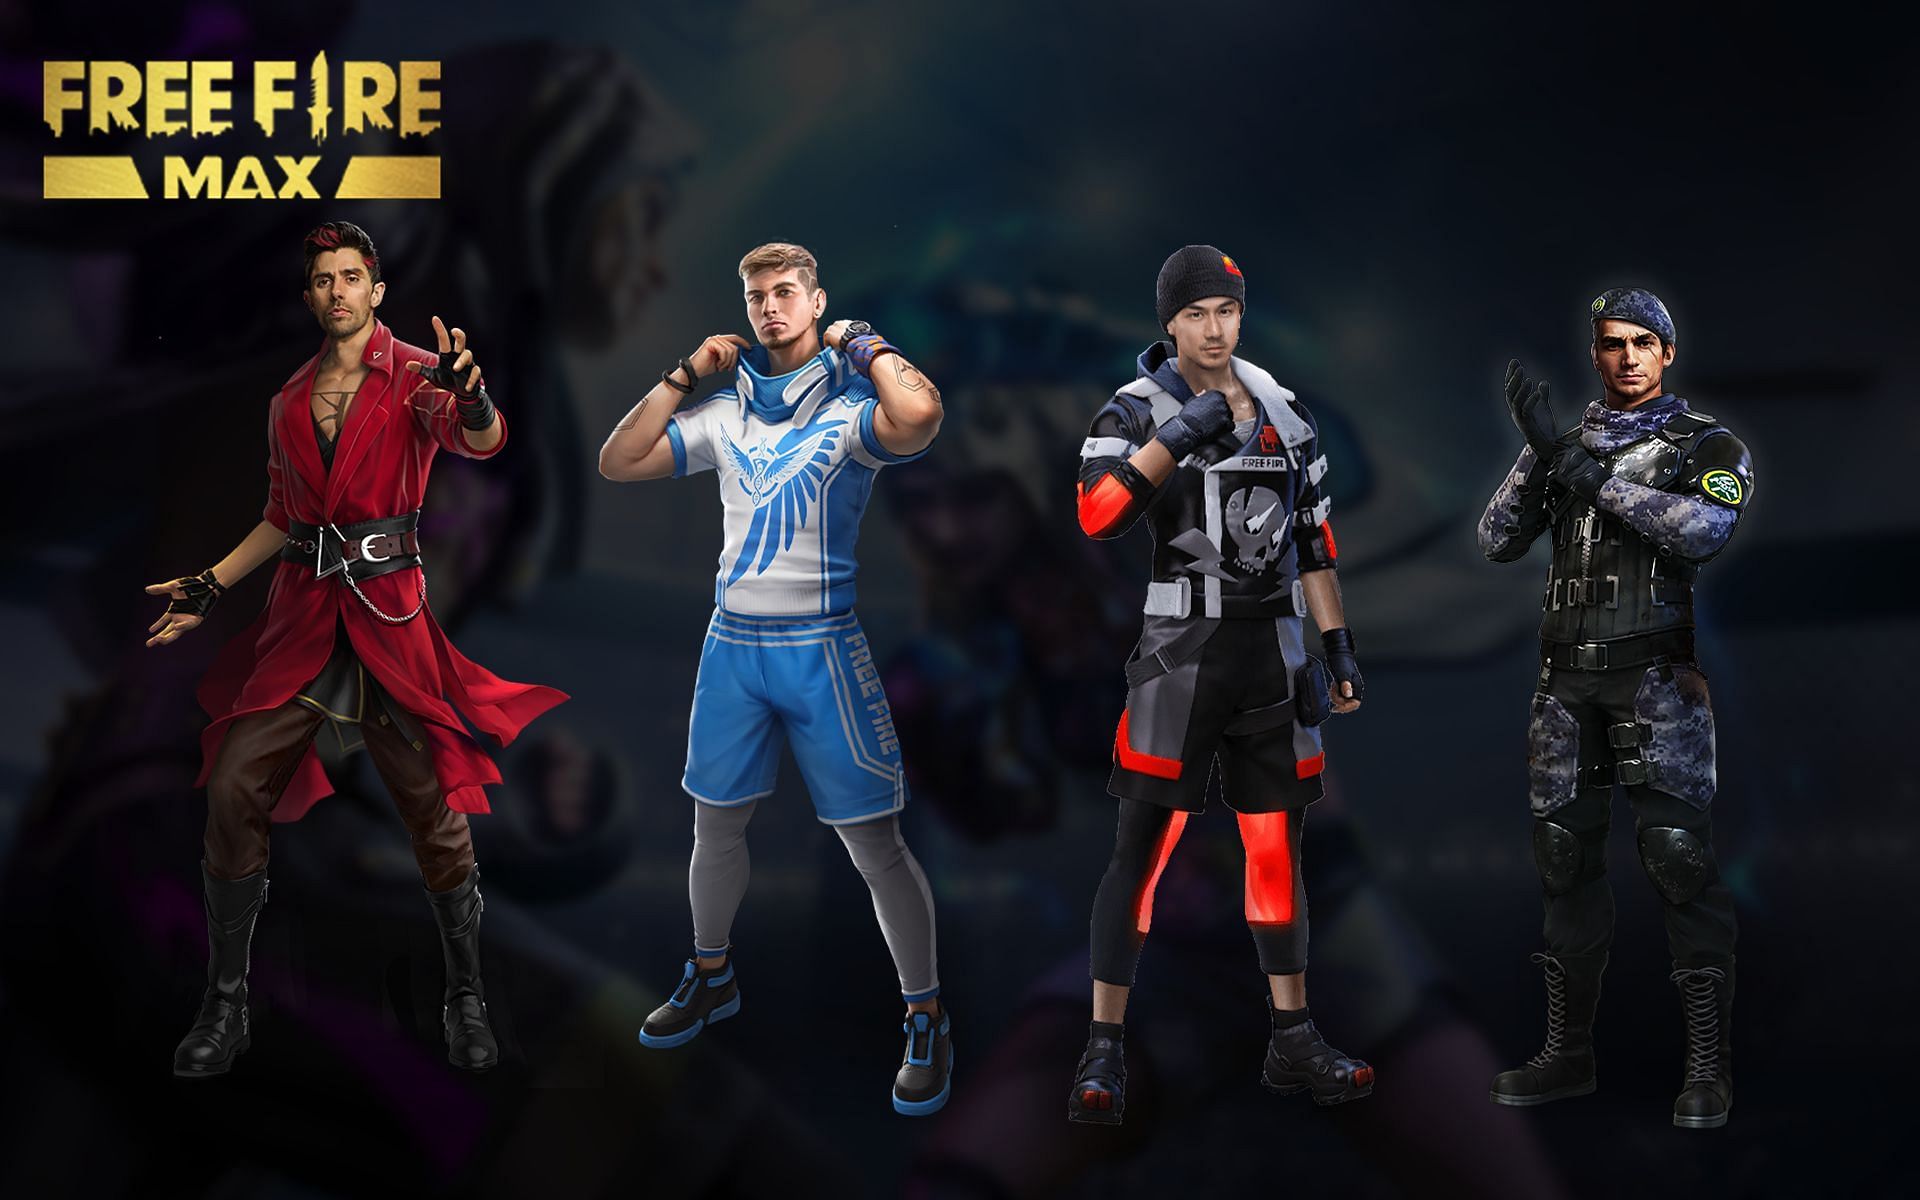 Using these character combinations in Free Fire MAX, the players can better their foes (Image via Sportskeeda)